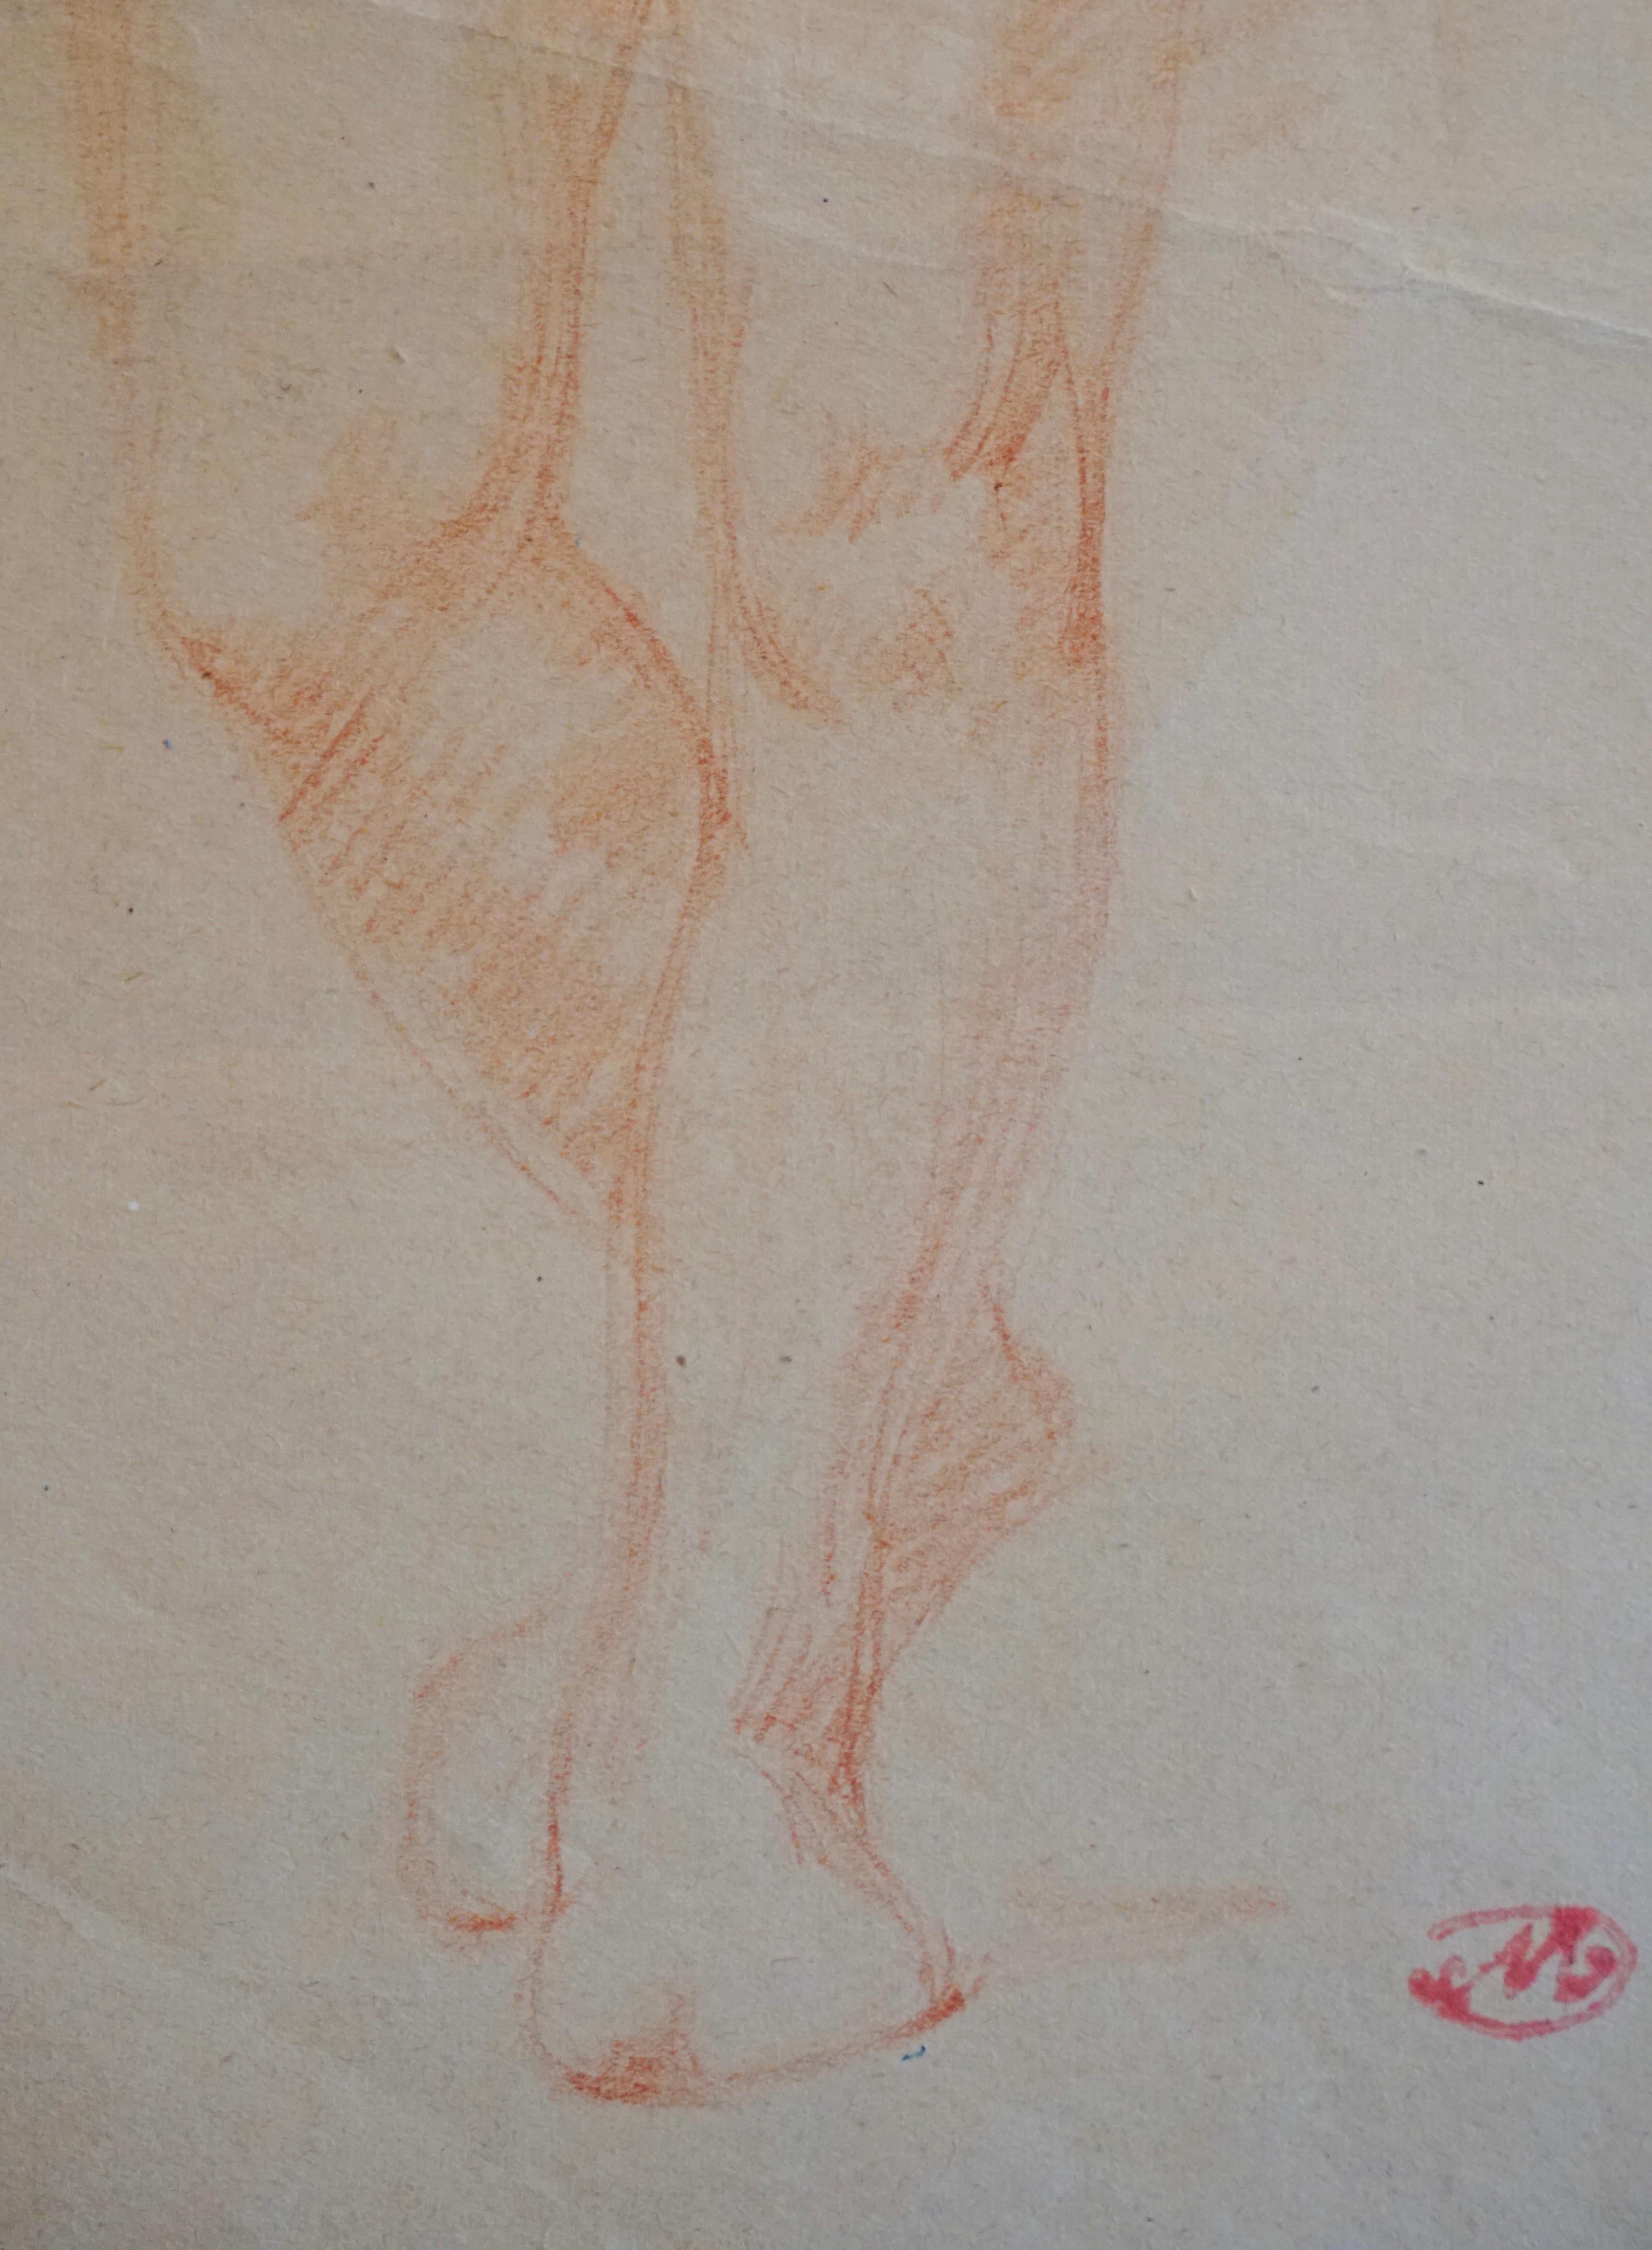 Hand-Painted Aristide Maillol Original Sanguine Nude Drawing, 1950s For Sale